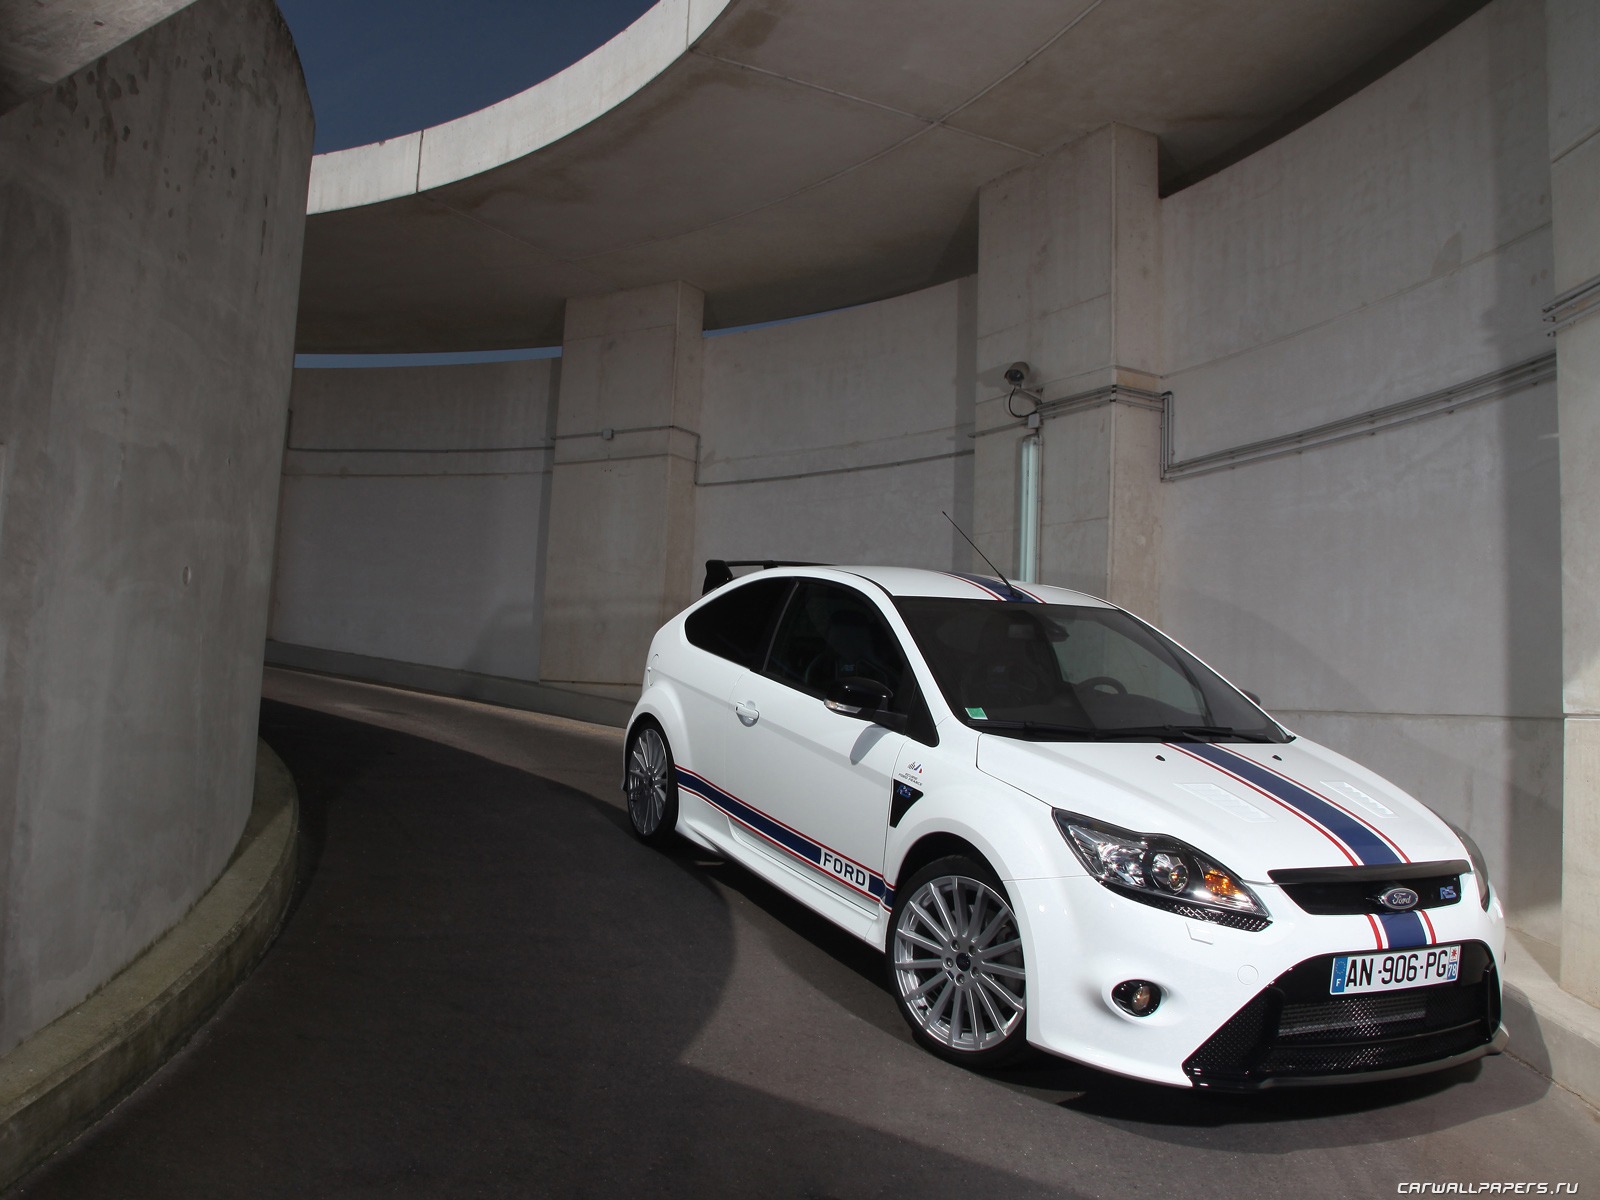 Ford Focus RS Le Mans Classic - 2010 福特7 - 1600x1200